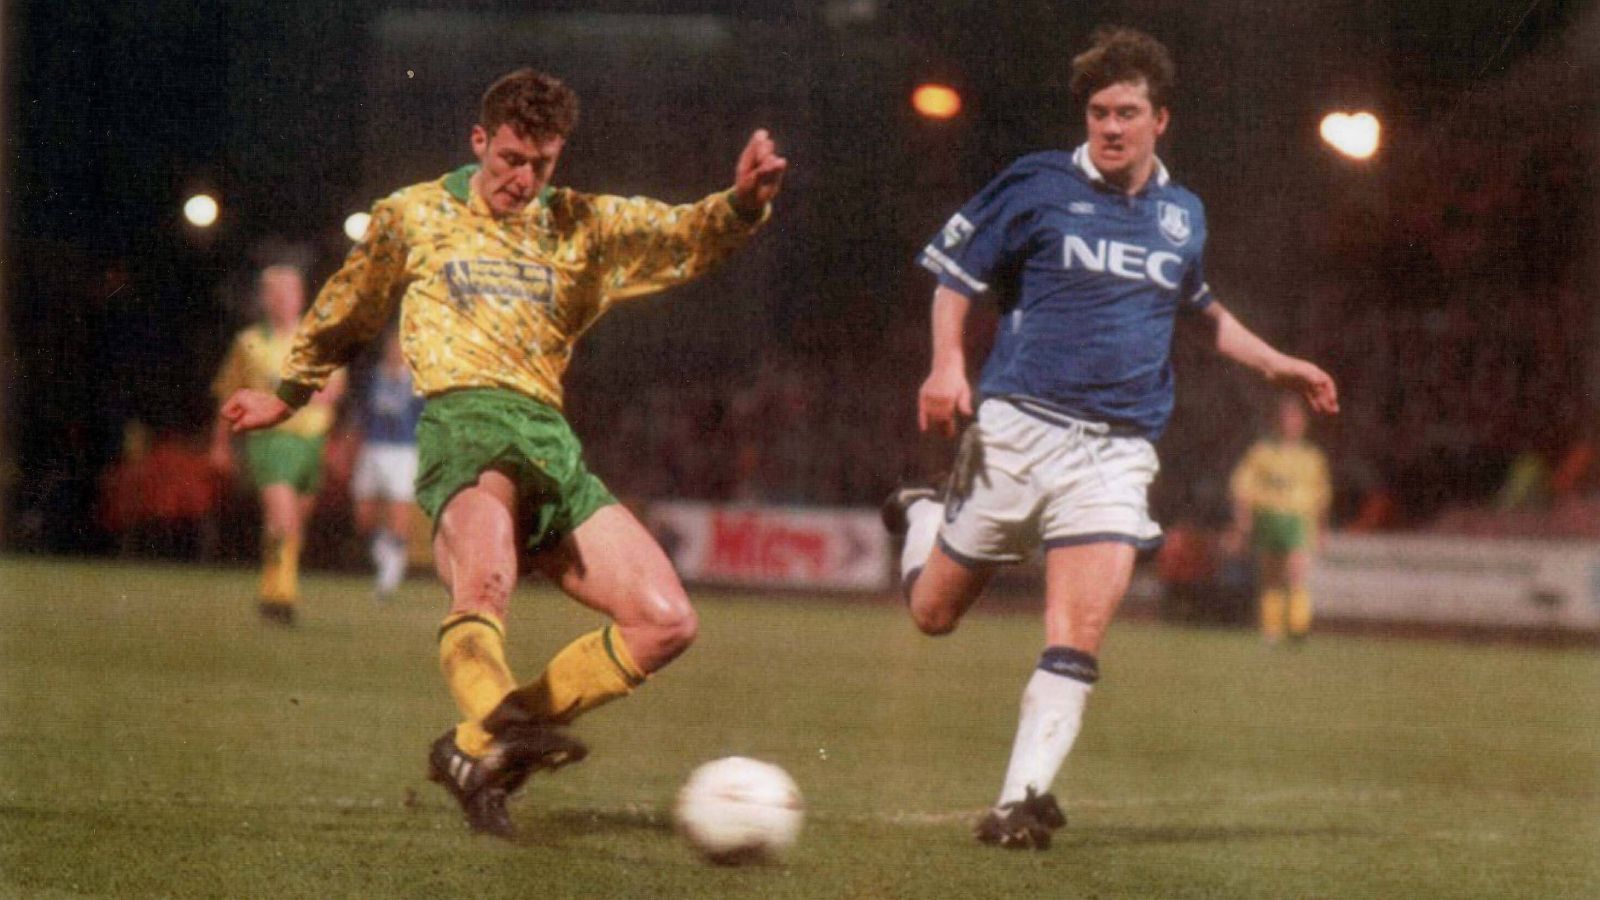 
                <strong>Norwich City</strong><br>
                &#x2022; 1. Chris Sutton (33 Tore, im Bild) -<br>&#x2022; 2. Grant Holt (23) -<br>&#x2022; 3. Mark Robins (19)<br>
              